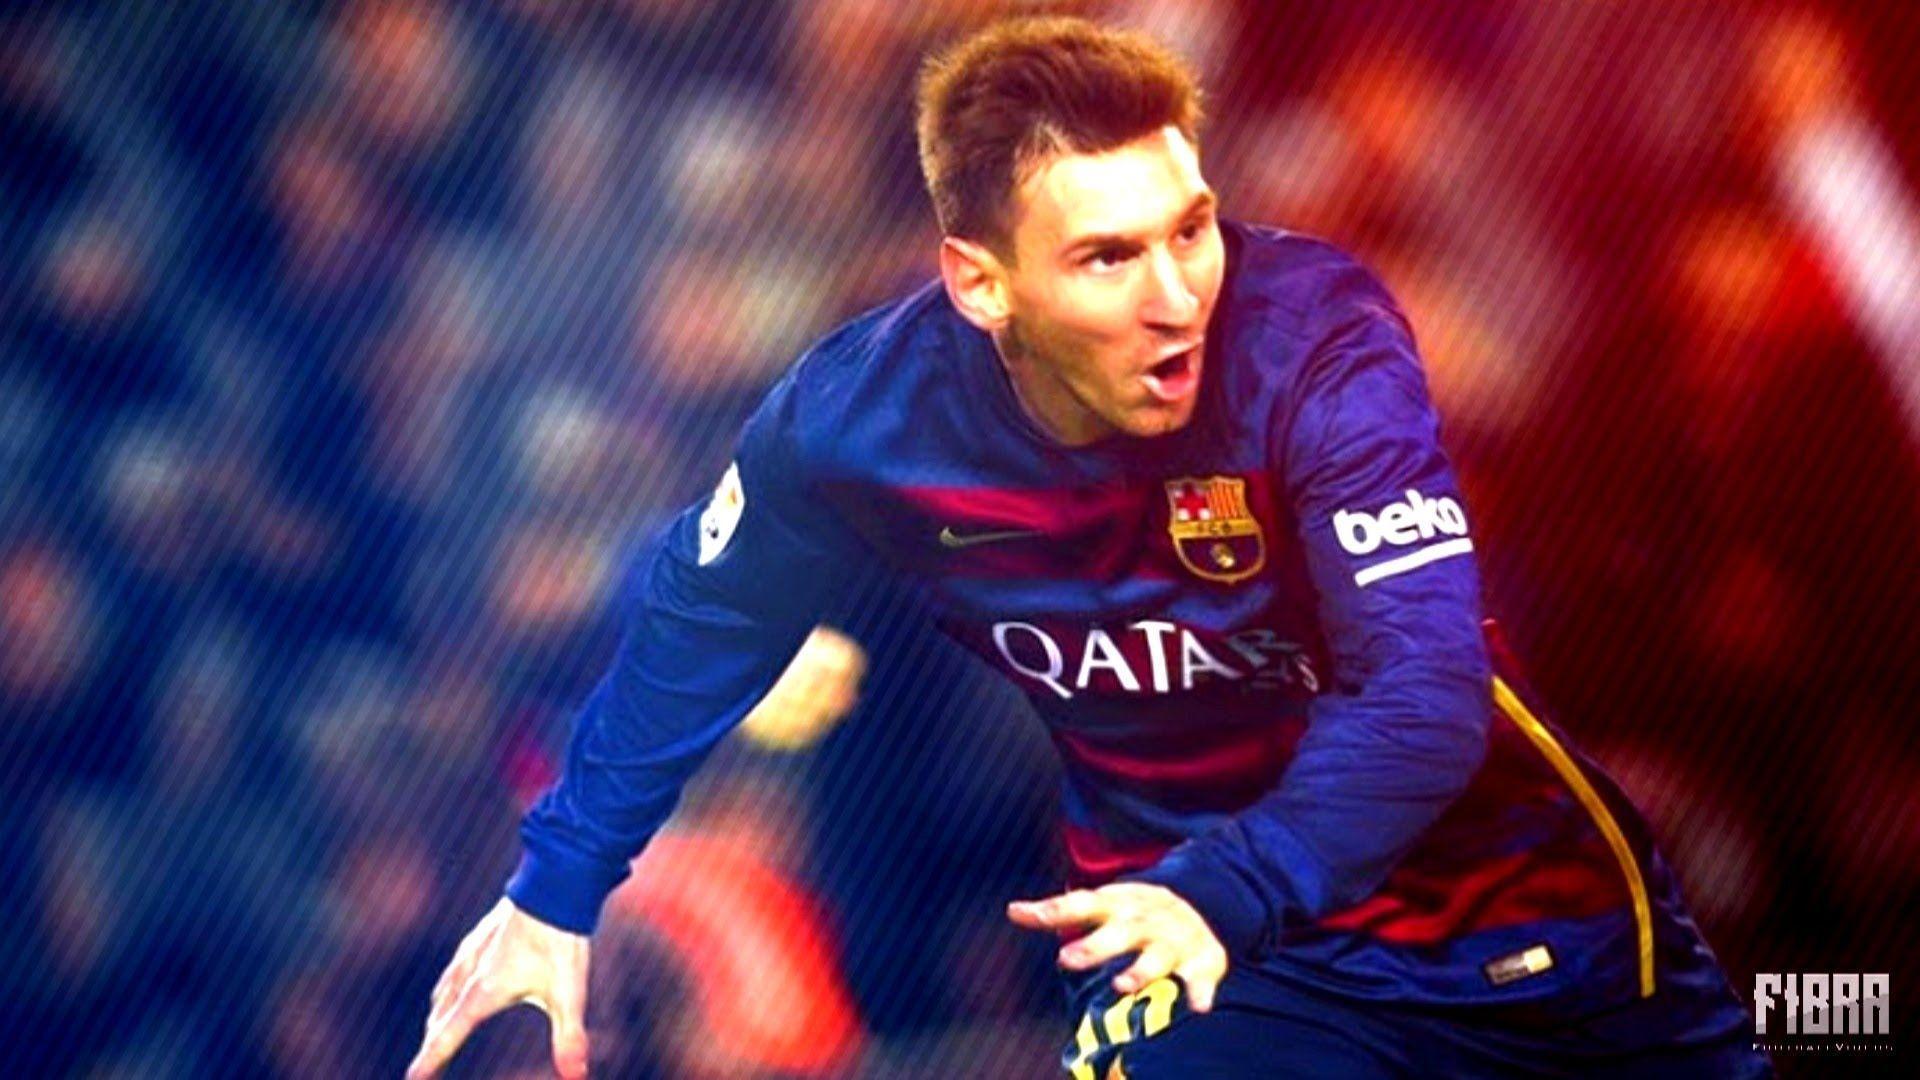 Songs In "Lionel Messi ▶ Ready For 2015 2016. Skills Show